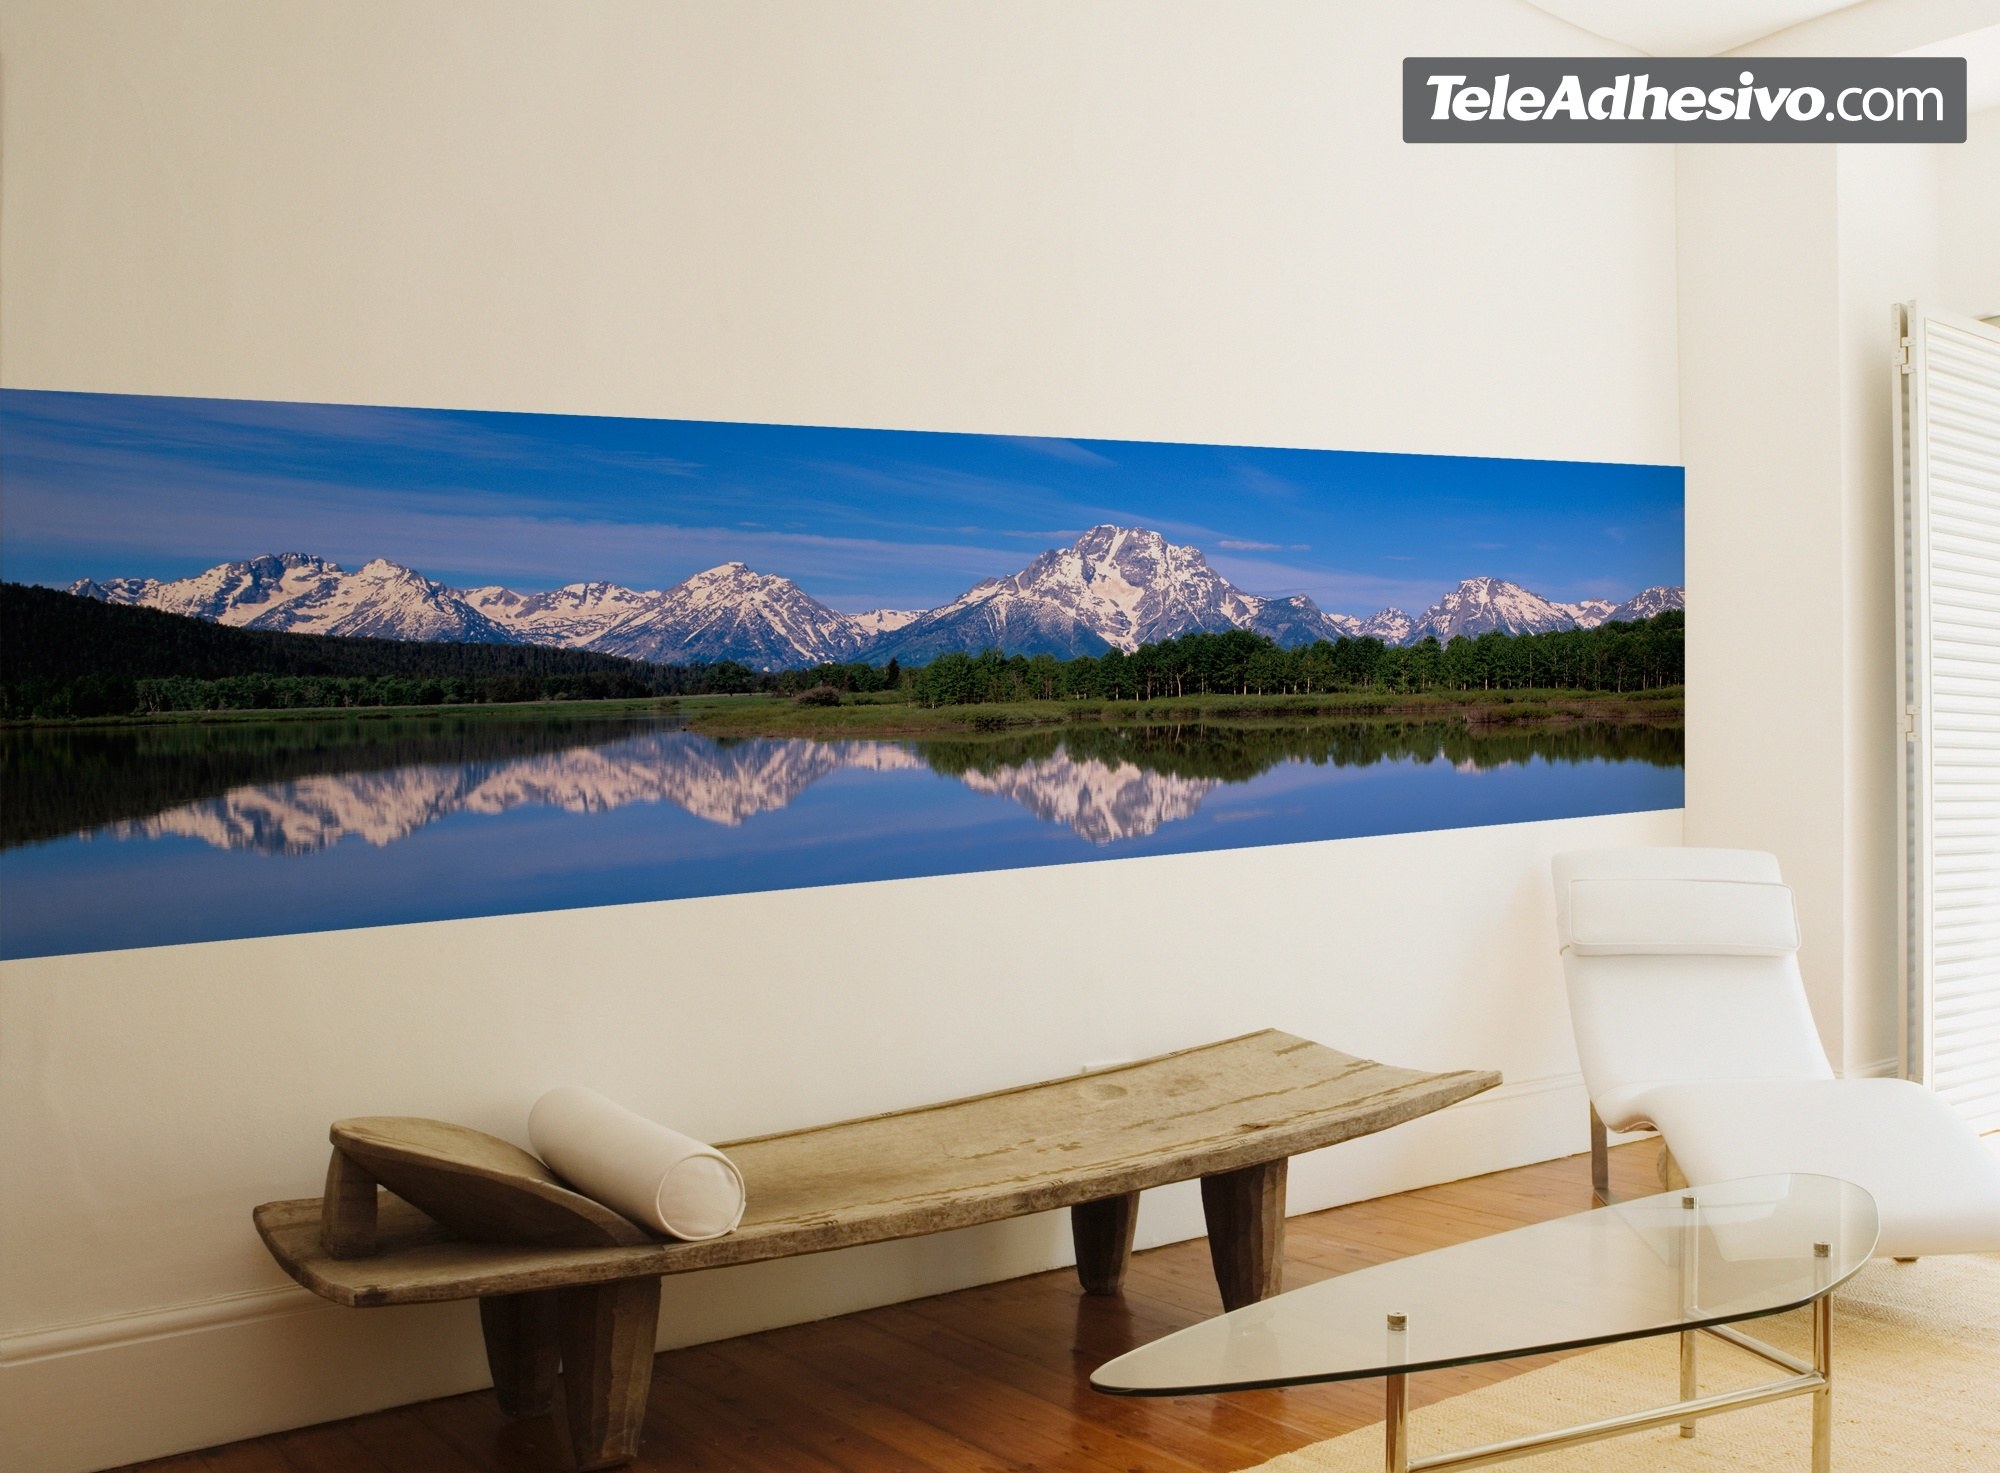 Wall Murals: The lake of the mountains